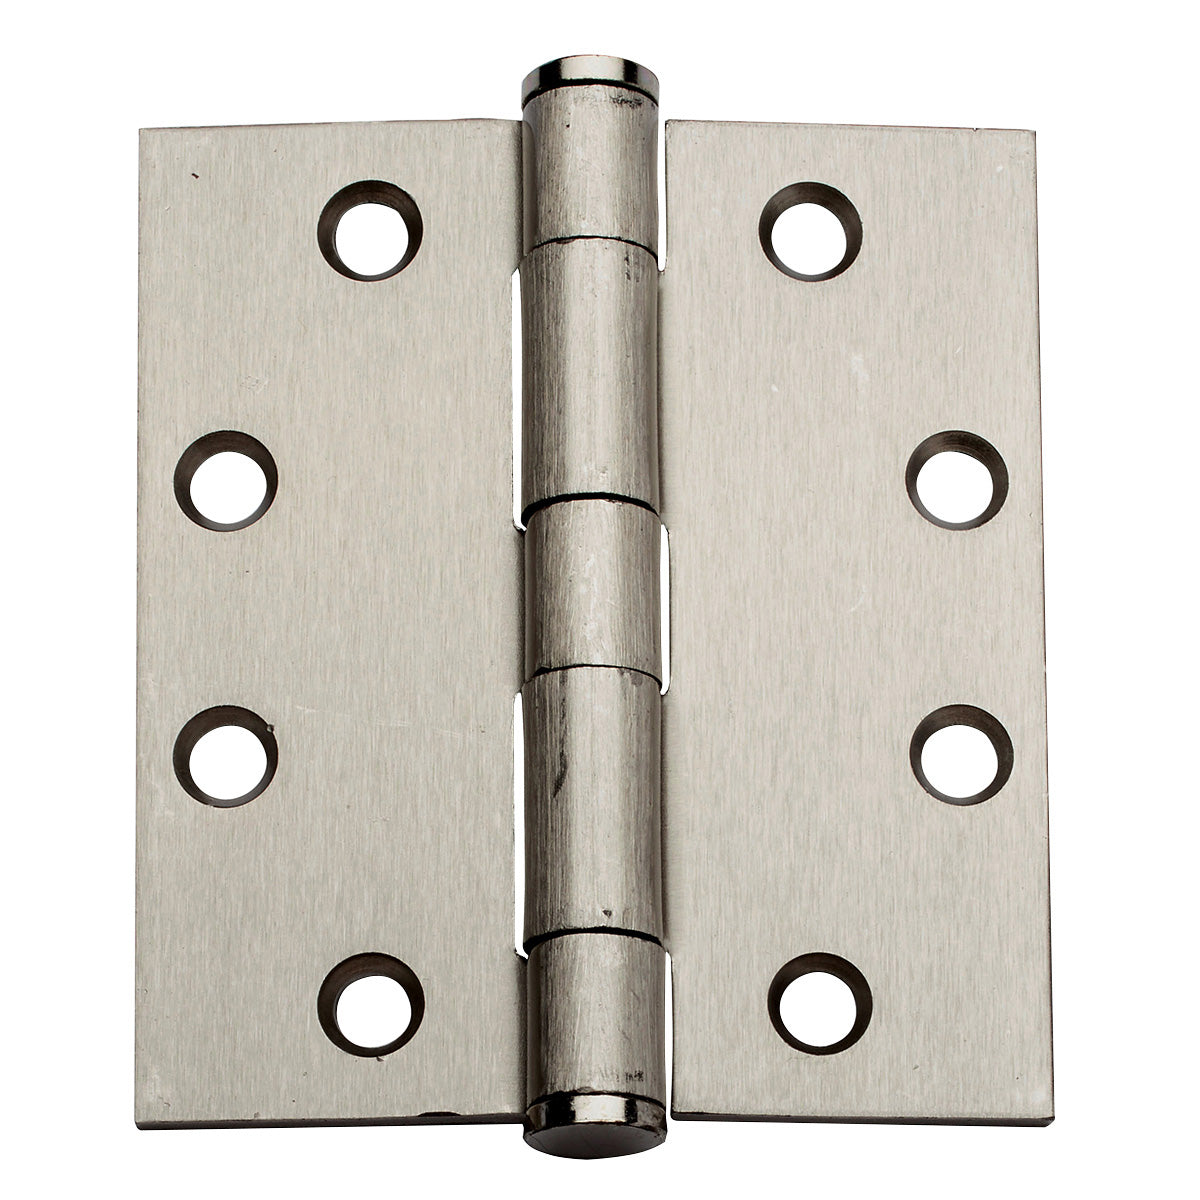 4-1/2"x4" Commercial Template Butt Hinge, Nickel